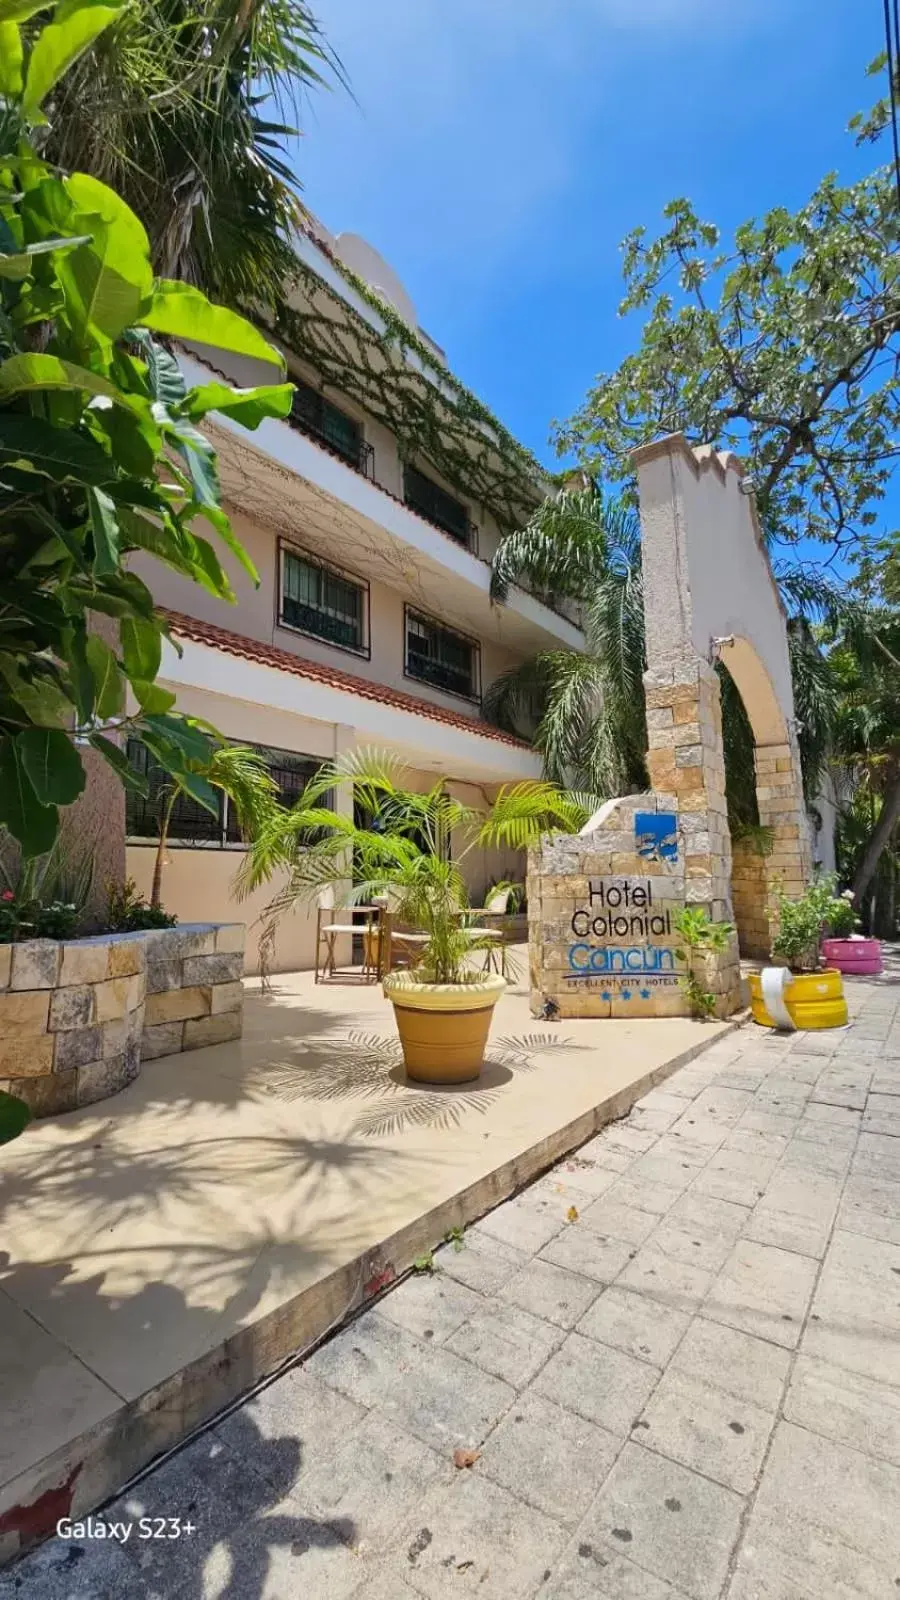 Property Building in Grand Hotel Colonial Cancun